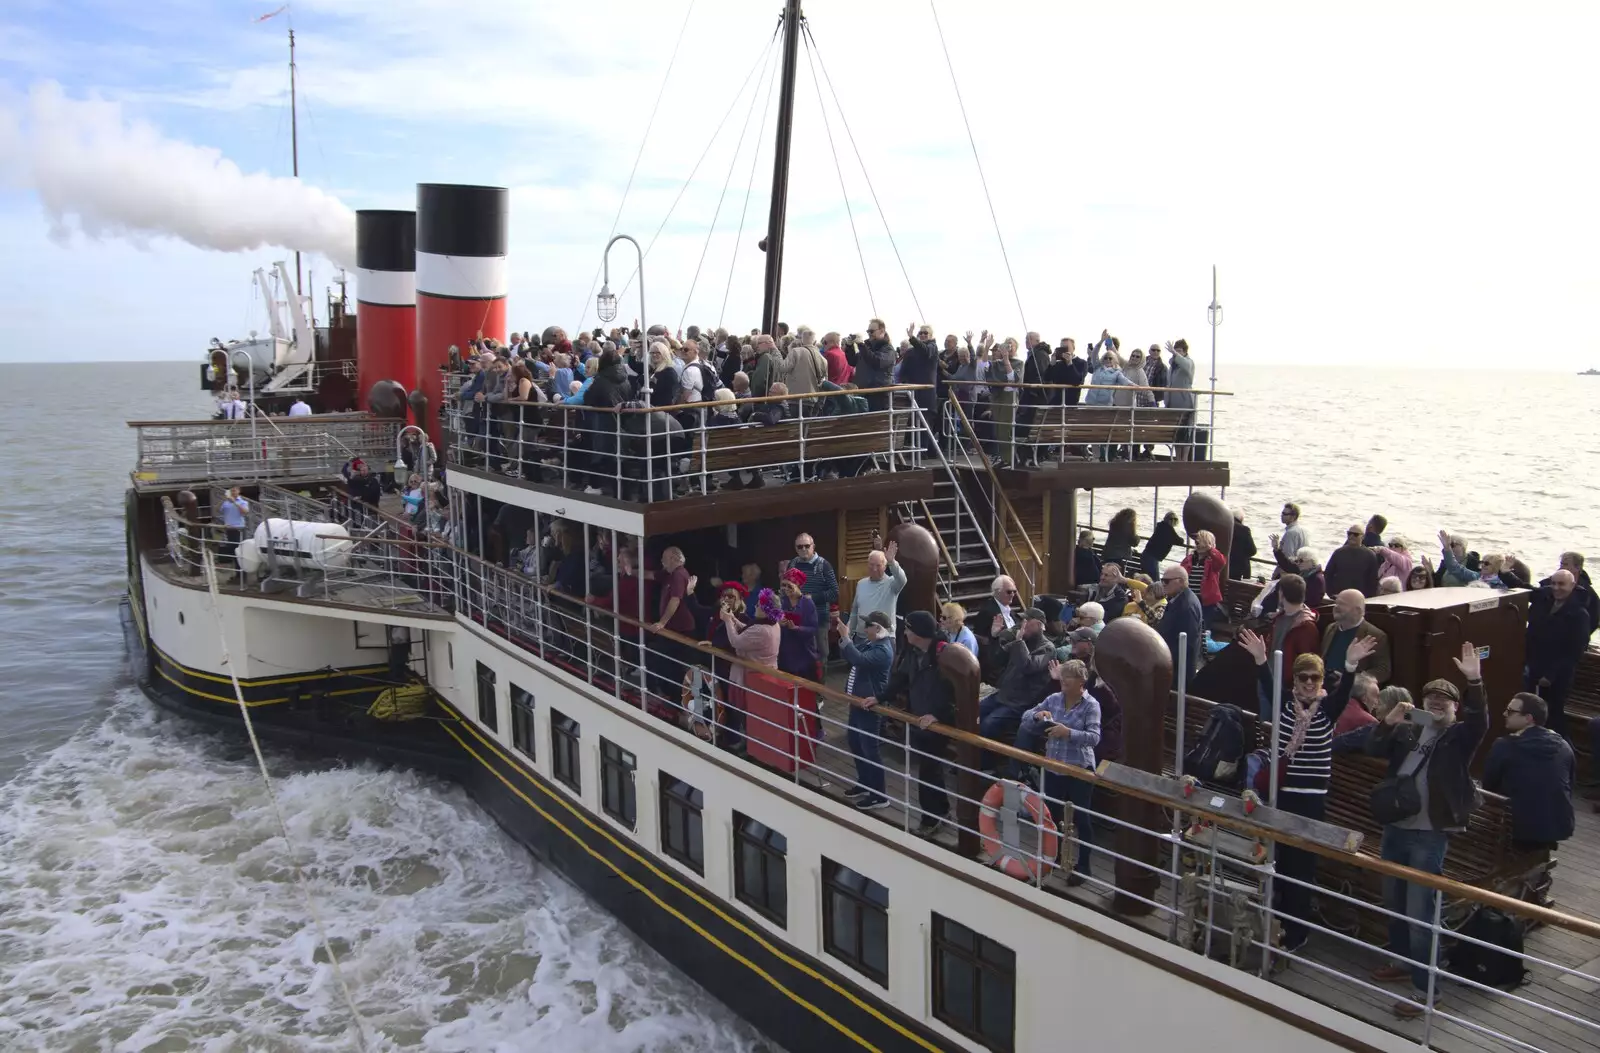 A crowded paddle steamer, from The Waverley Paddle Steamer at Southwold Pier, Suffolk - 27th September 2023